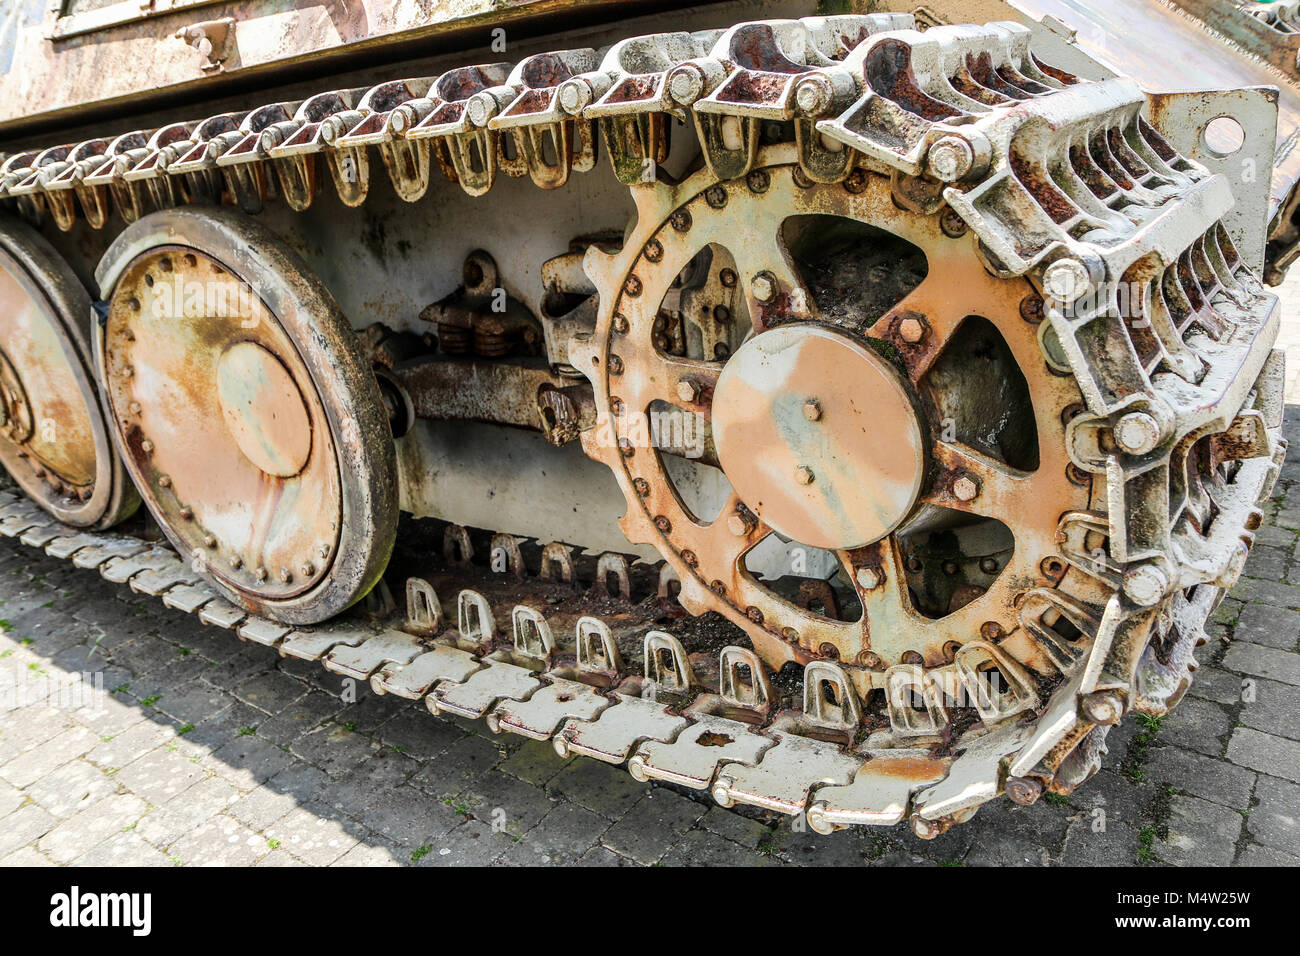 A detail picture of the German World War II tank Panther standing as a memorial in Belgium. The chassis can be seen. Stock Photo